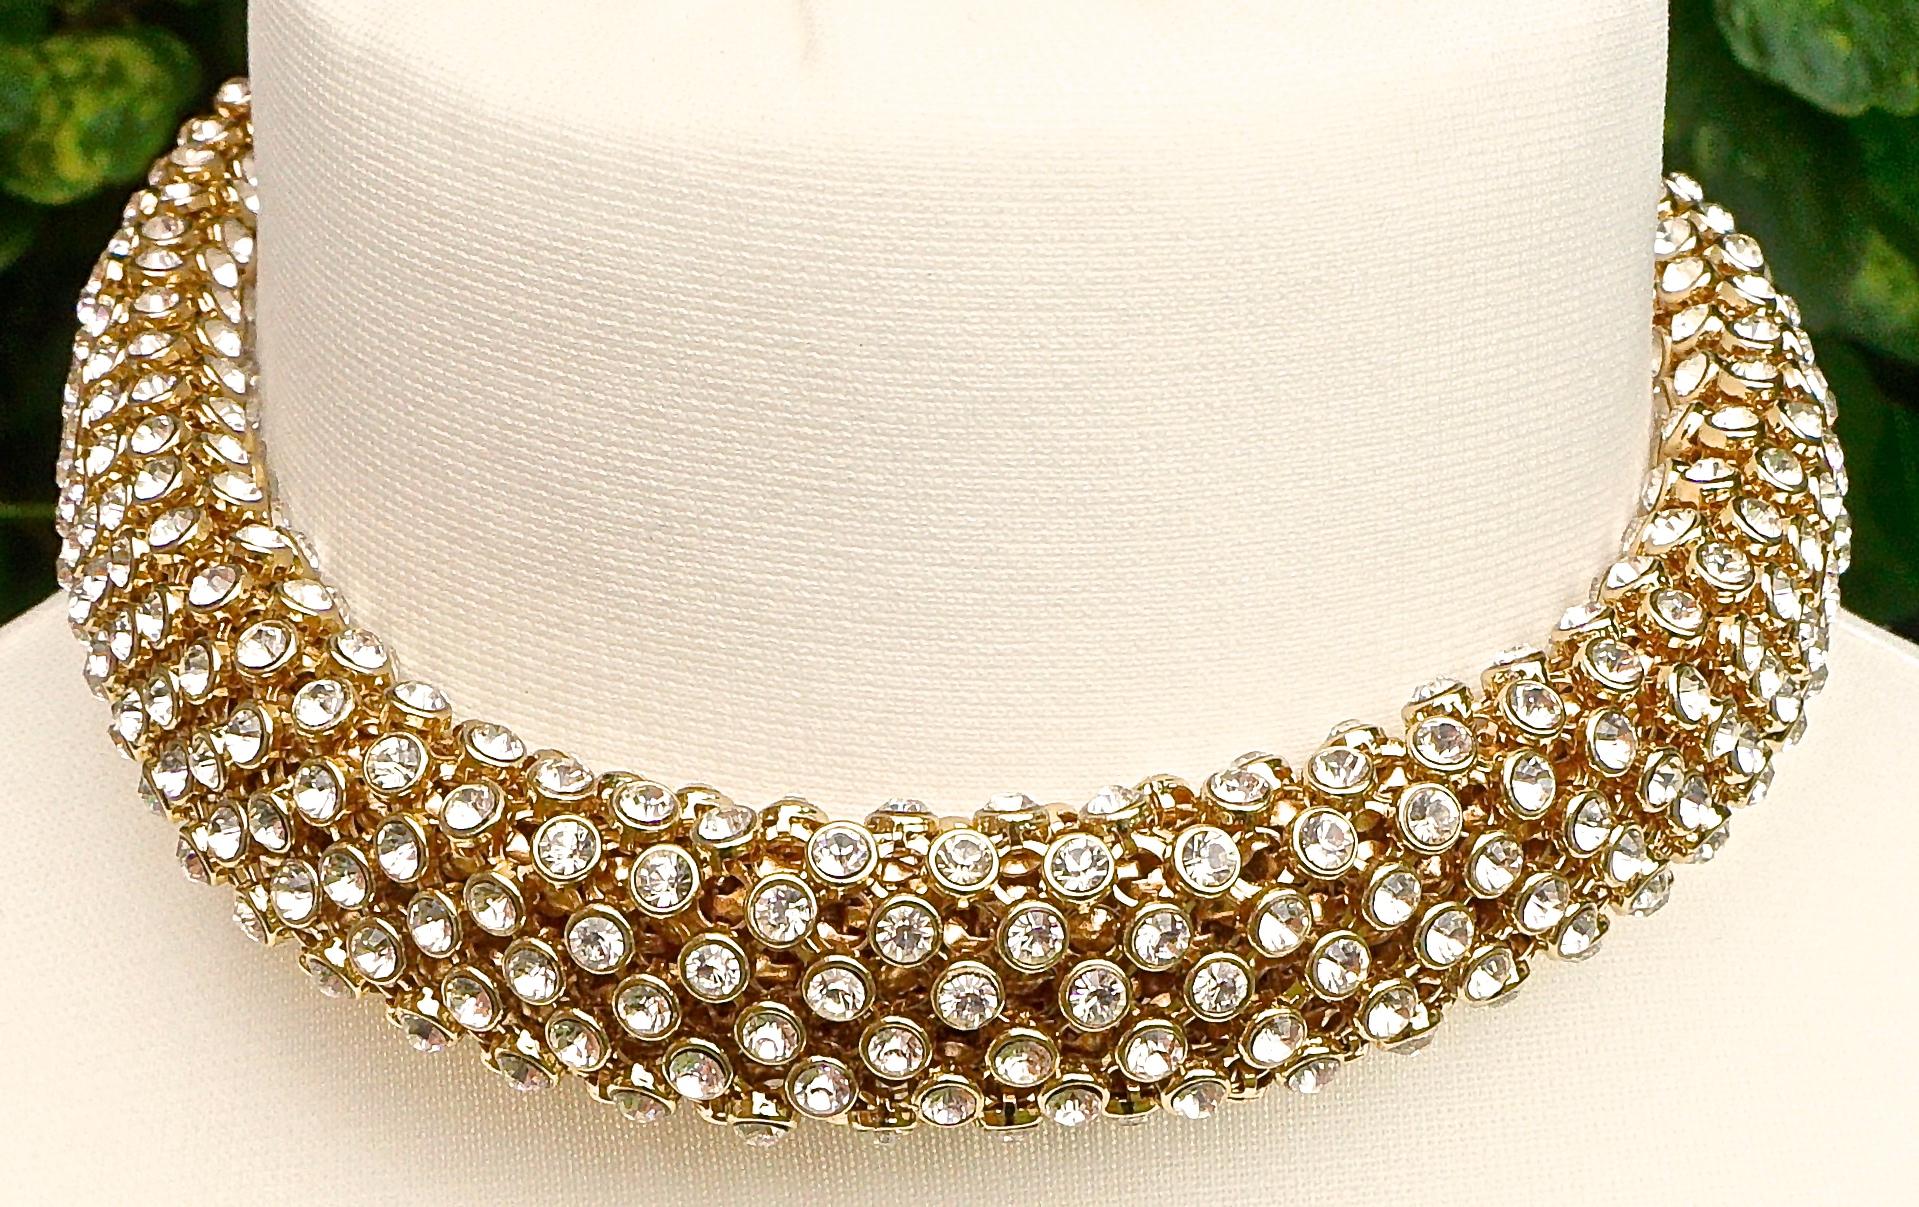 Fabulous vintage gold tone necklace completely embellished with clear rhinestones, circa 1980s. It is quite lightweight, and in very good vintage condition.
The necklace measures 41cm (16.14 inches) in length, 2cm (0.79 inch) in width and is depth